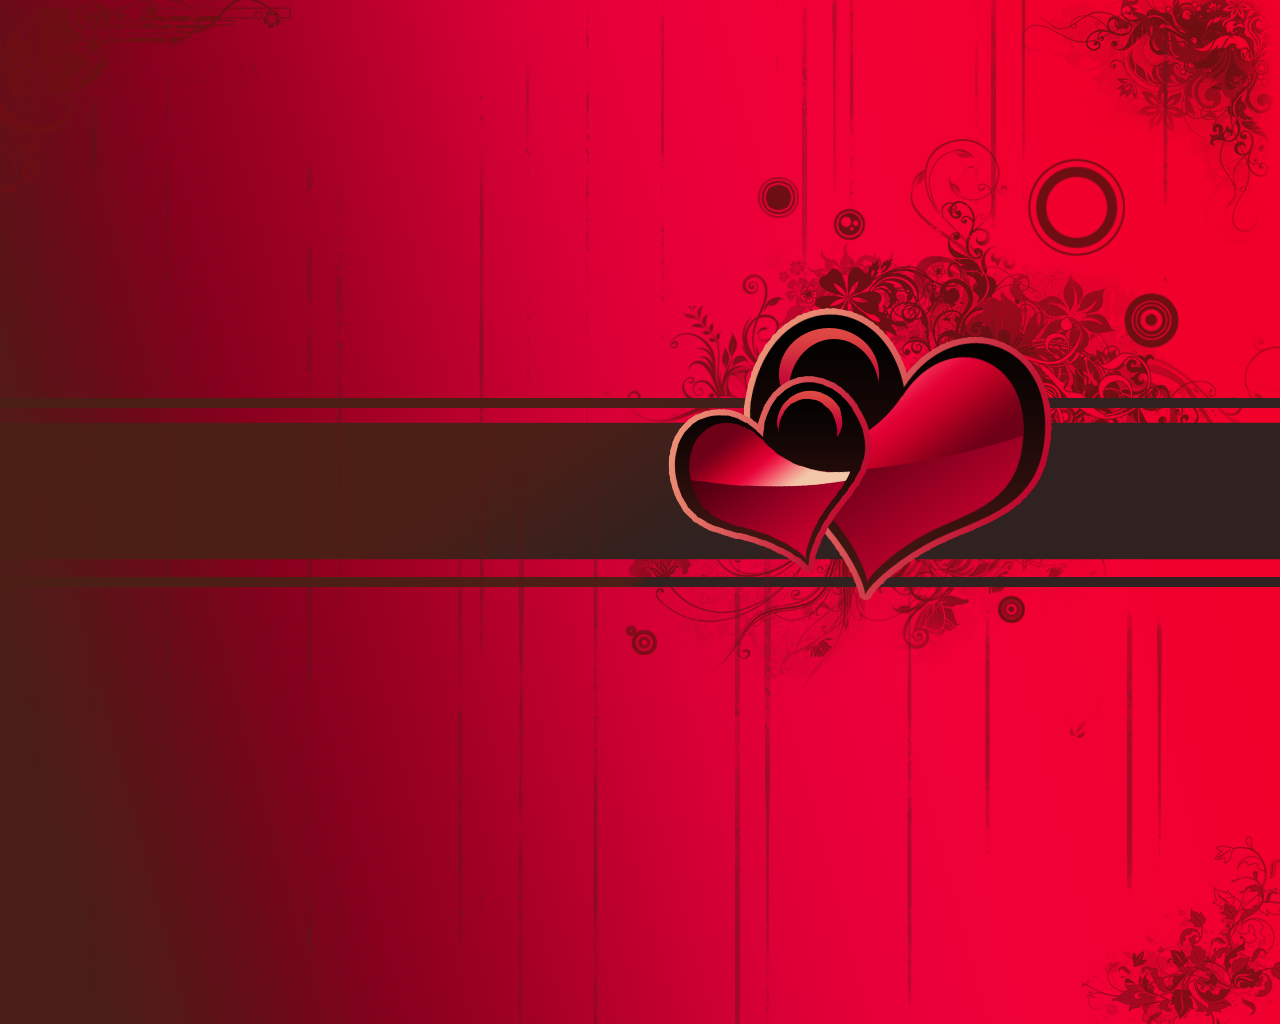 30 Heart Inspired Wallpapers for Valentines   blueblotscom 1280x1024